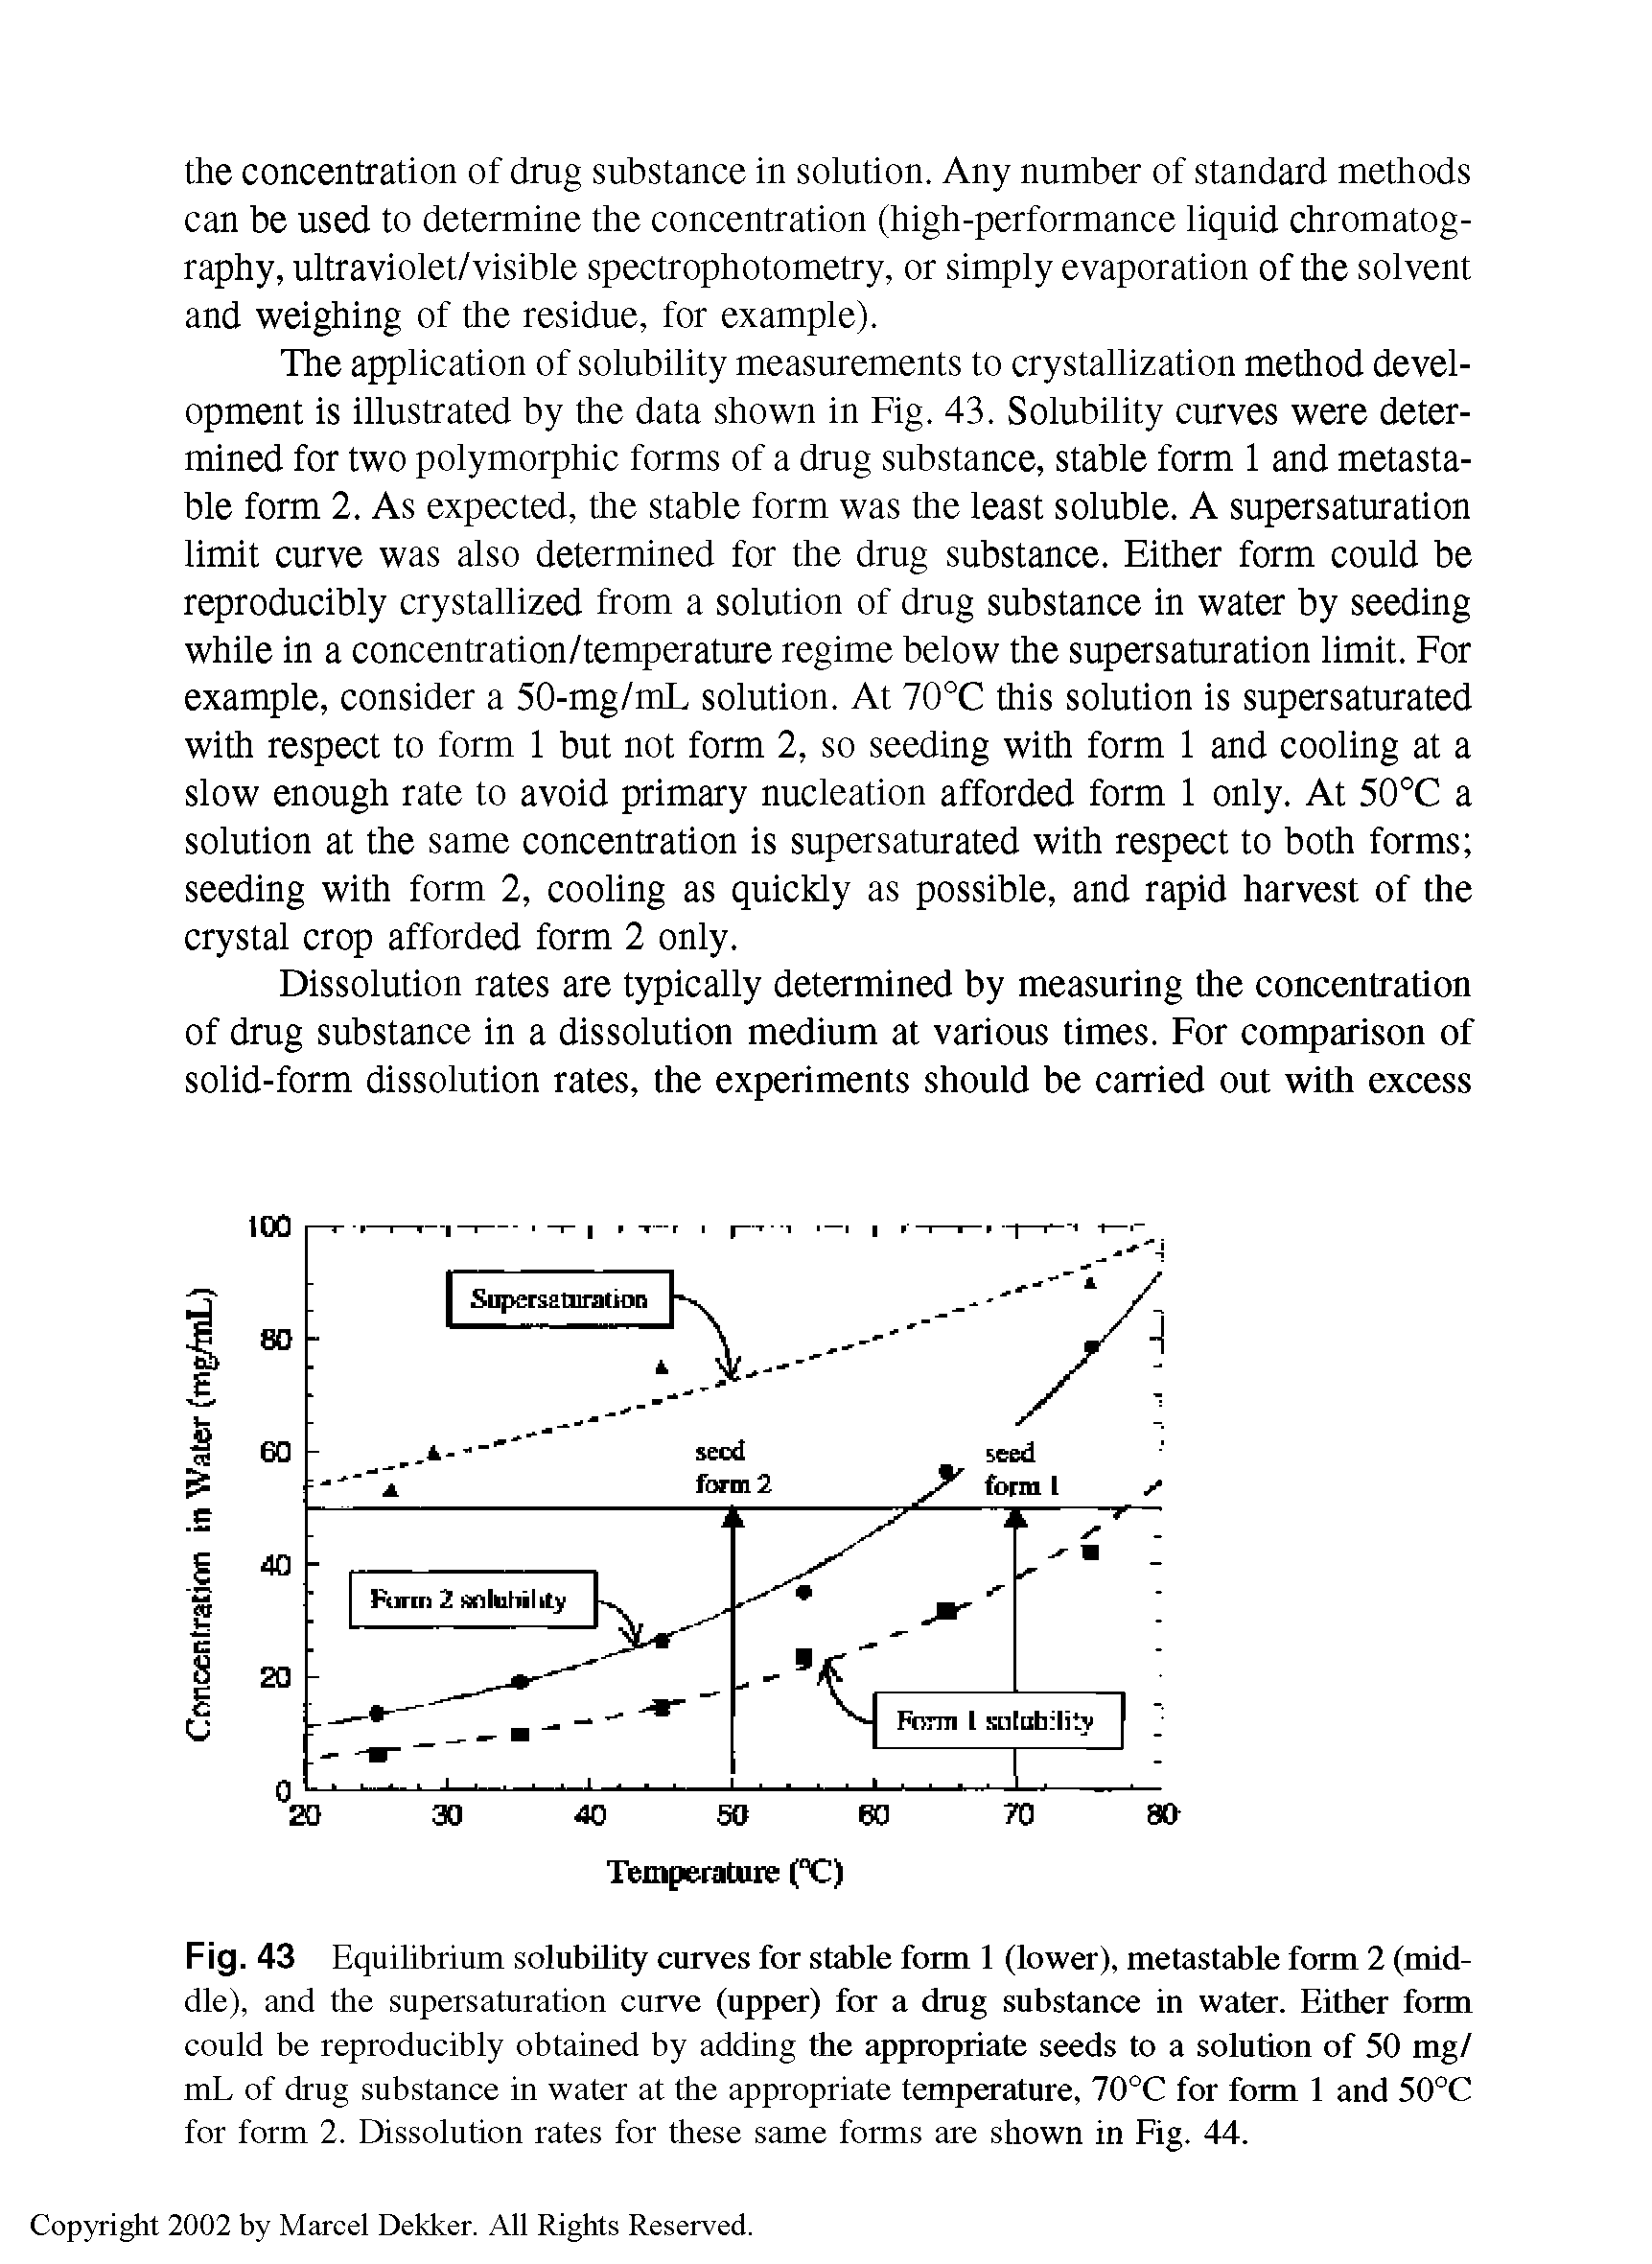 Fig. 43 Equilibrium solubility curves for stable form 1 (lower), metastable form 2 (middle), and the supersaturation curve (upper) for a drug substance in water. Either form could be reproducibly obtained by adding the appropriate seeds to a solution of 50 mg/ mL of drug substance in water at the appropriate temperature, 70°C for form 1 and 50°C for form 2. Dissolution rates for these same forms are shown in Fig. 44.